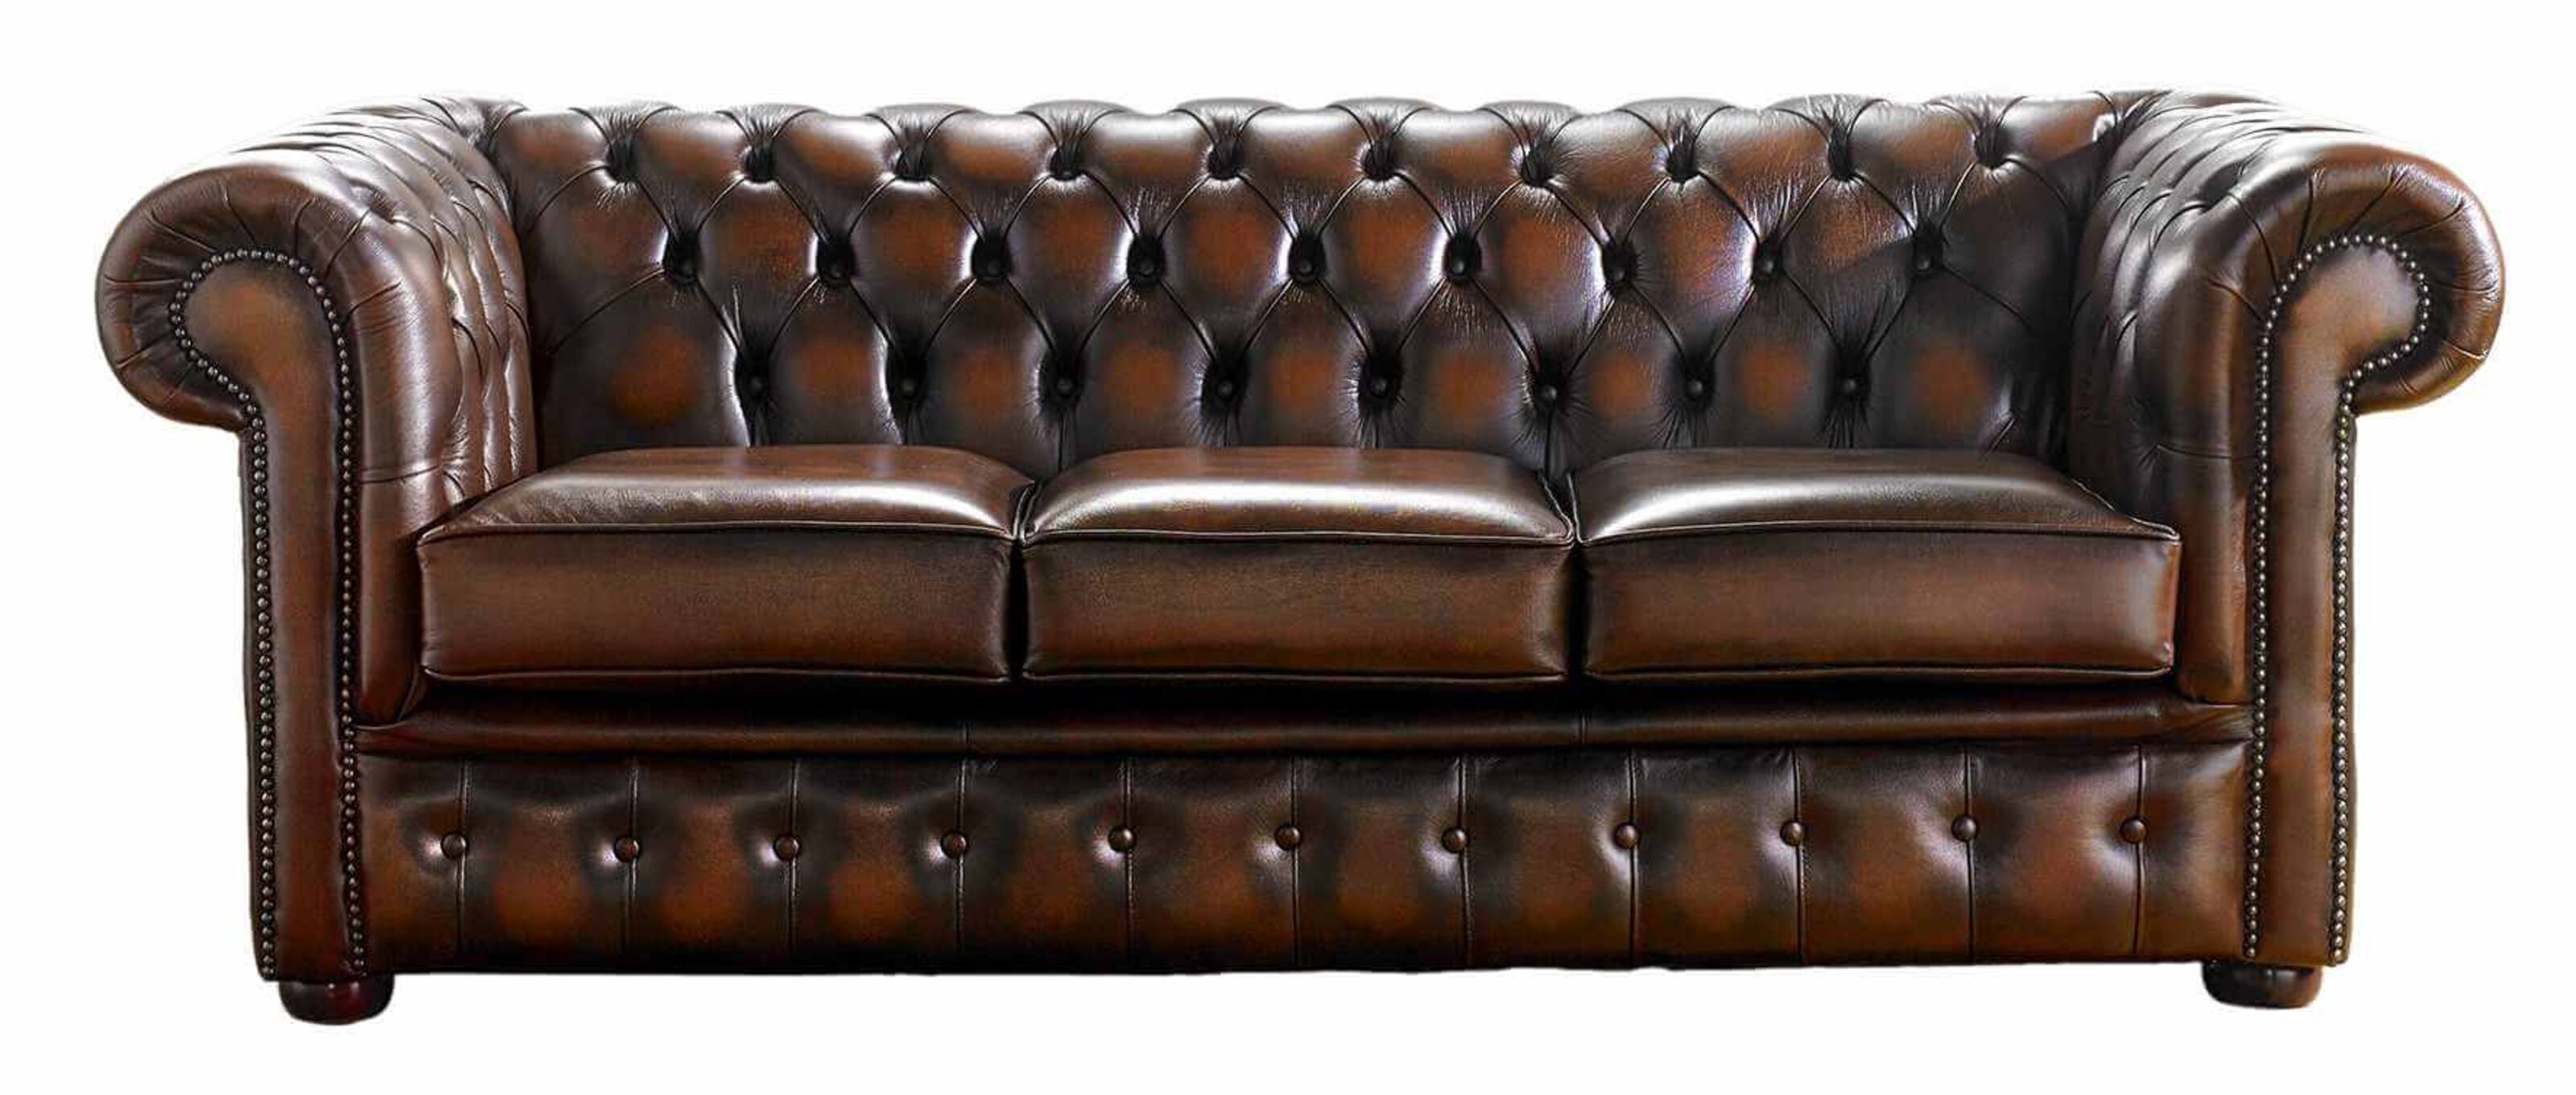 Sofa Style Guide: Decorating Inspiration for Chesterfield Sofas  %Post Title